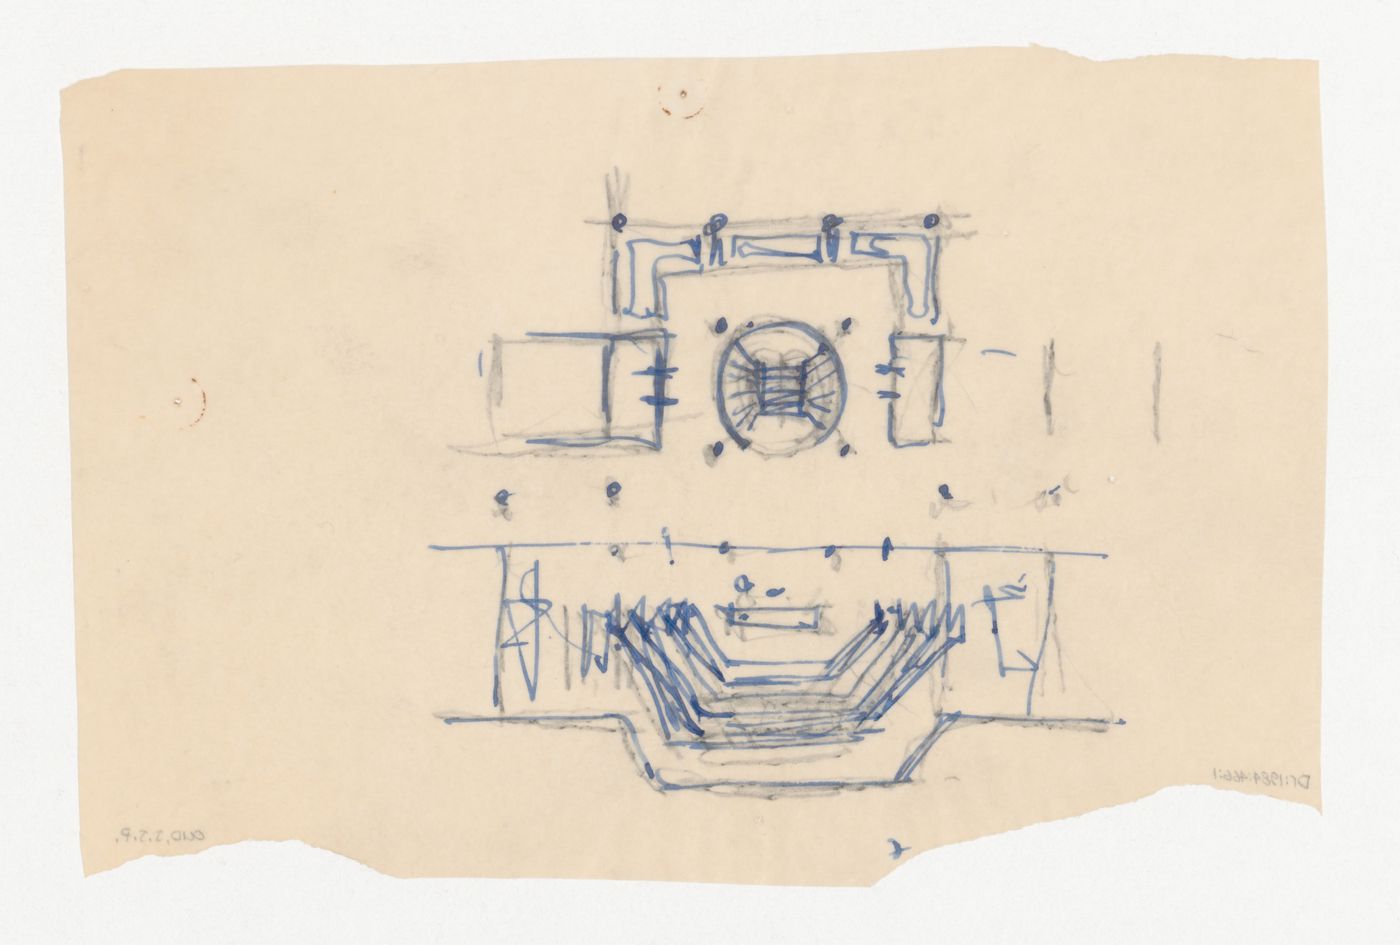 Sketch plan for an auditorium for the Shell Building, The Hague, Netherlands